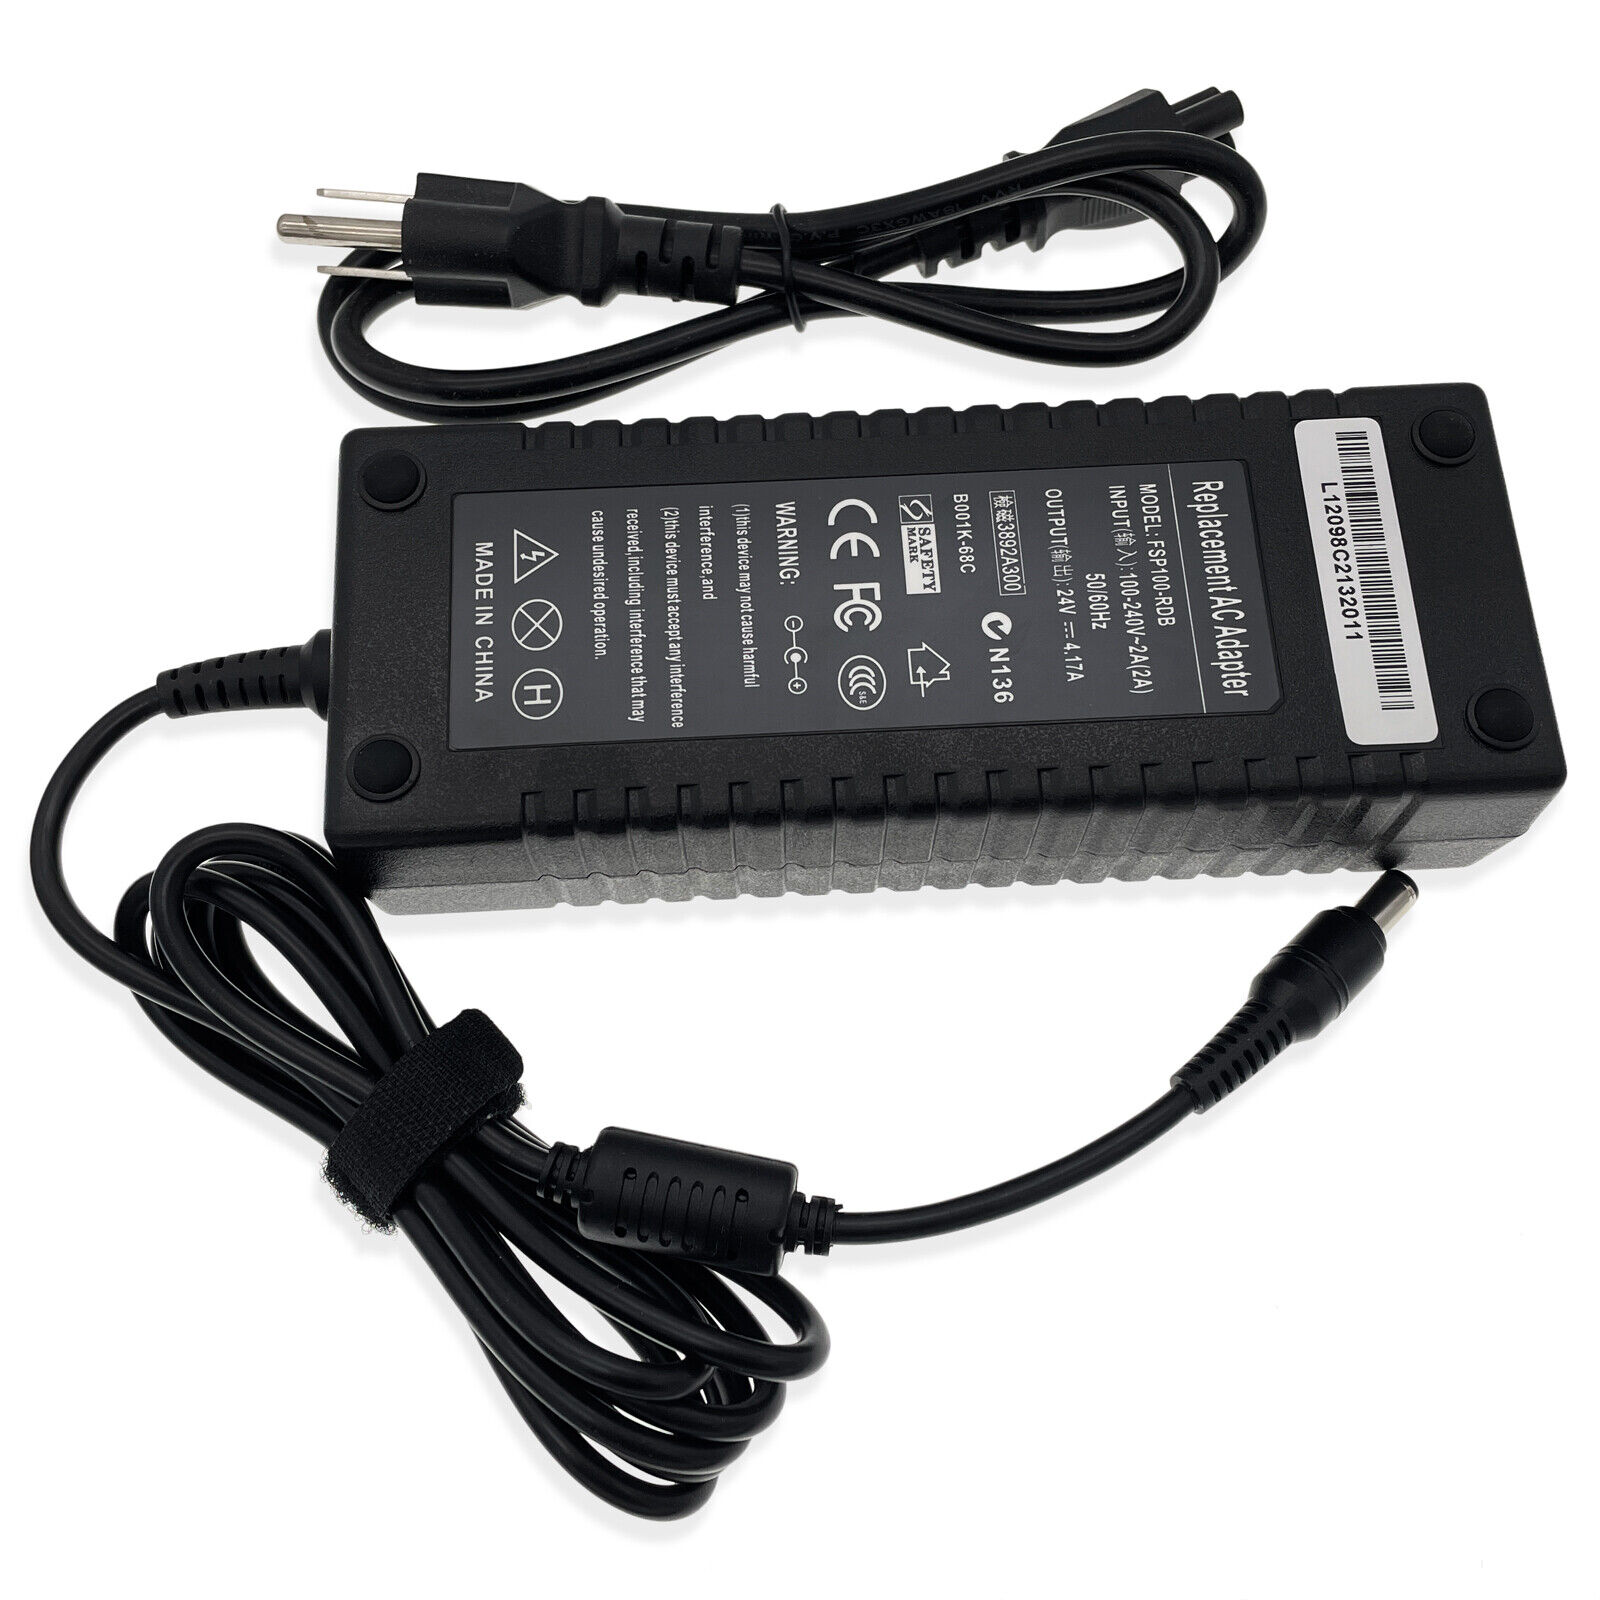 24V AC Power Adapter Charger Supply Cord For Zebra GX420D, GX420T,GX430T Printer Brand Unbranded/Generic Compatible Bra